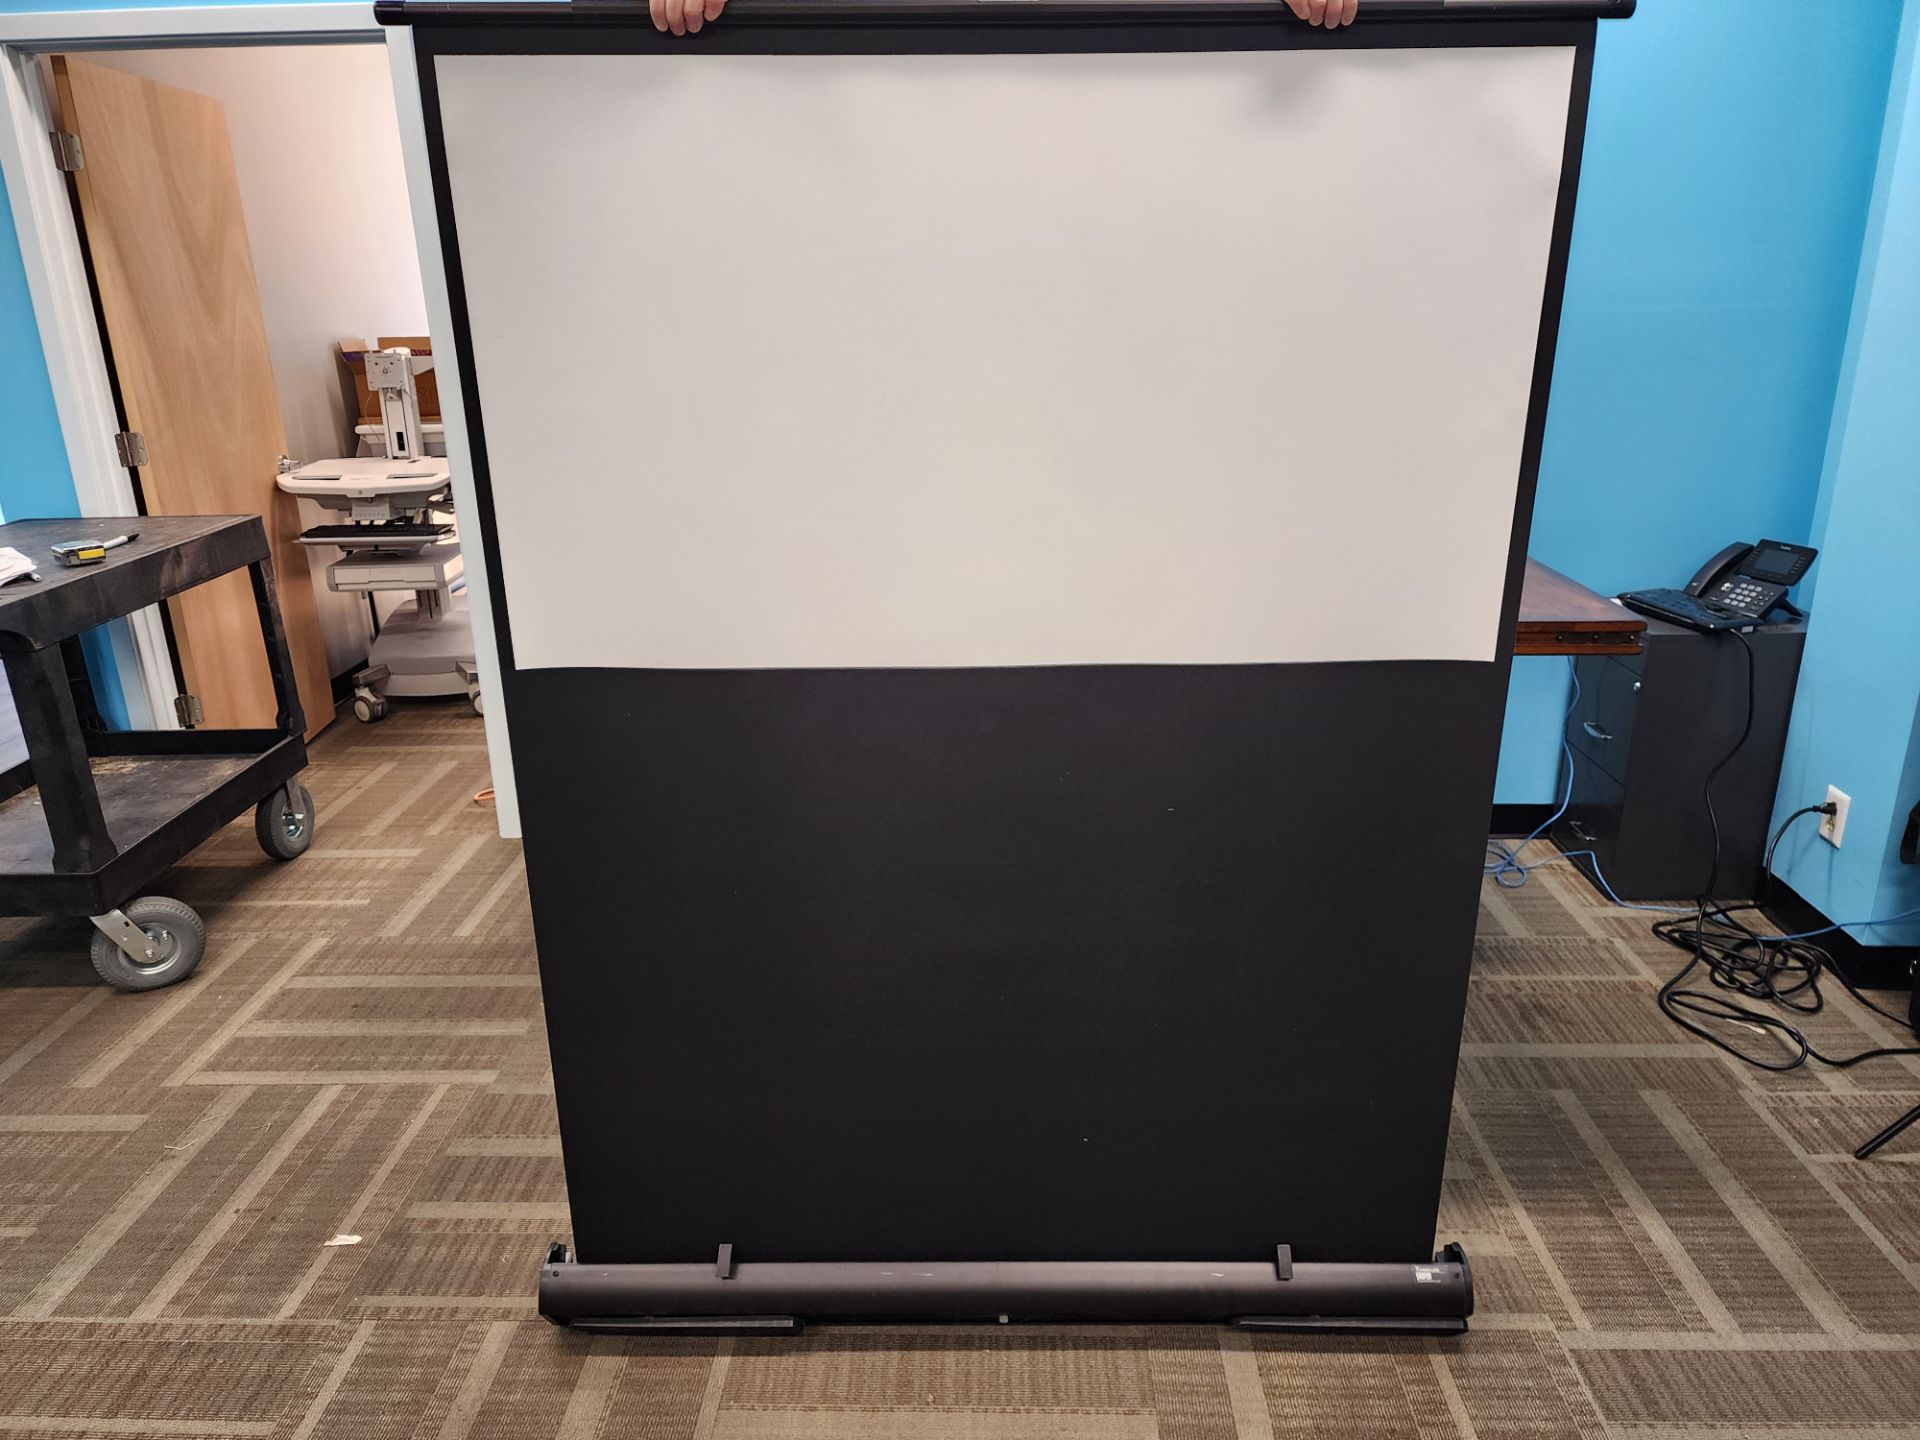 Draper Traveller Portable Projector Screen, Max Image 60" High x 80" Wide, Includes Upright - Image 2 of 5